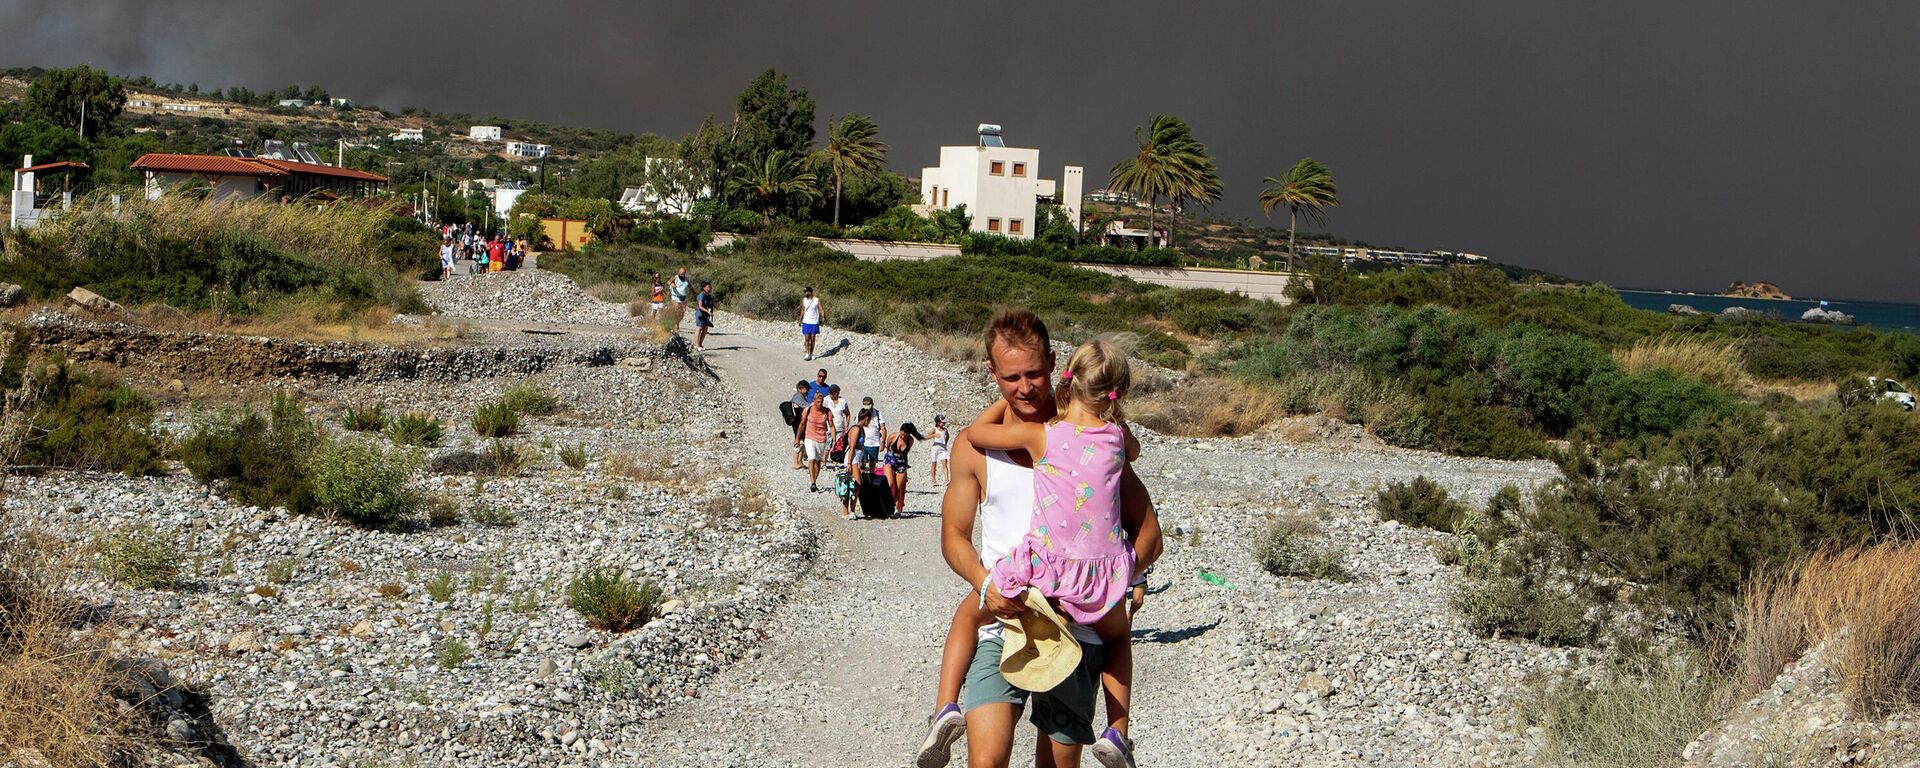 A man carries a child as they leave an area where a forest fire burns, on the island of Rhodes, Greece, Saturday, July 22, 2023.  - Sputnik International, 1920, 23.07.2023